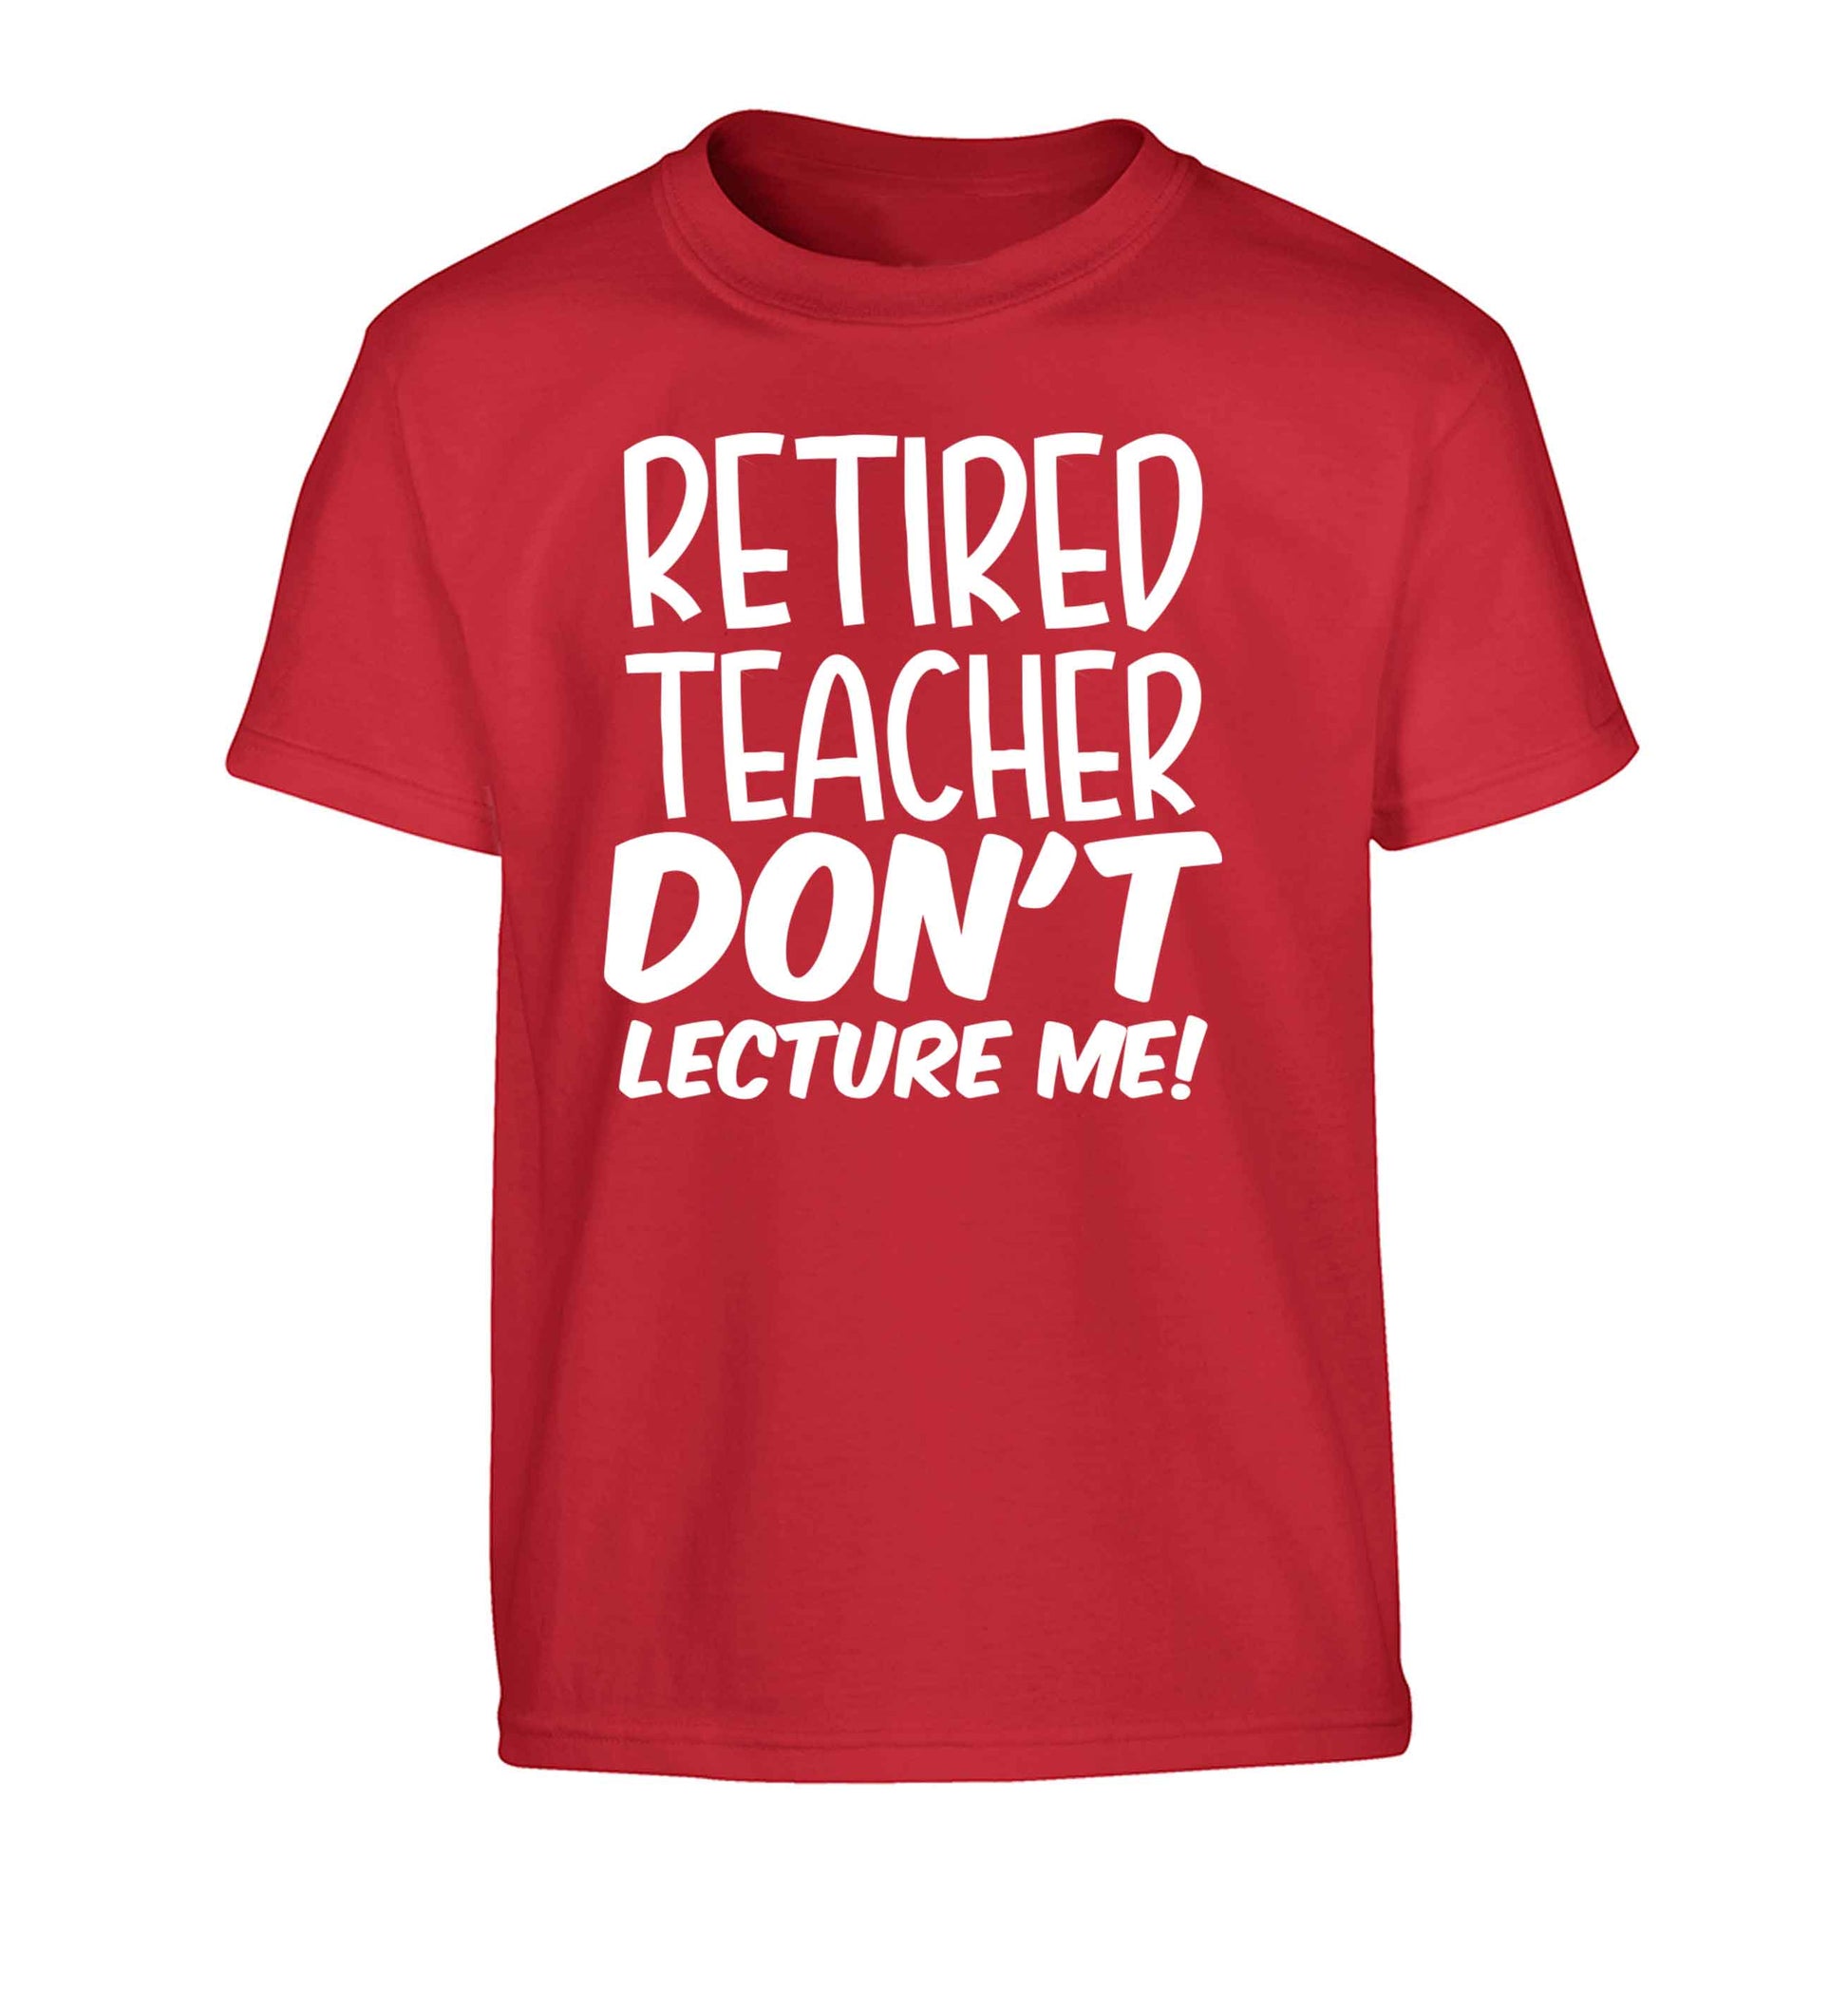 Retired teacher don't lecture me! Children's red Tshirt 12-13 Years